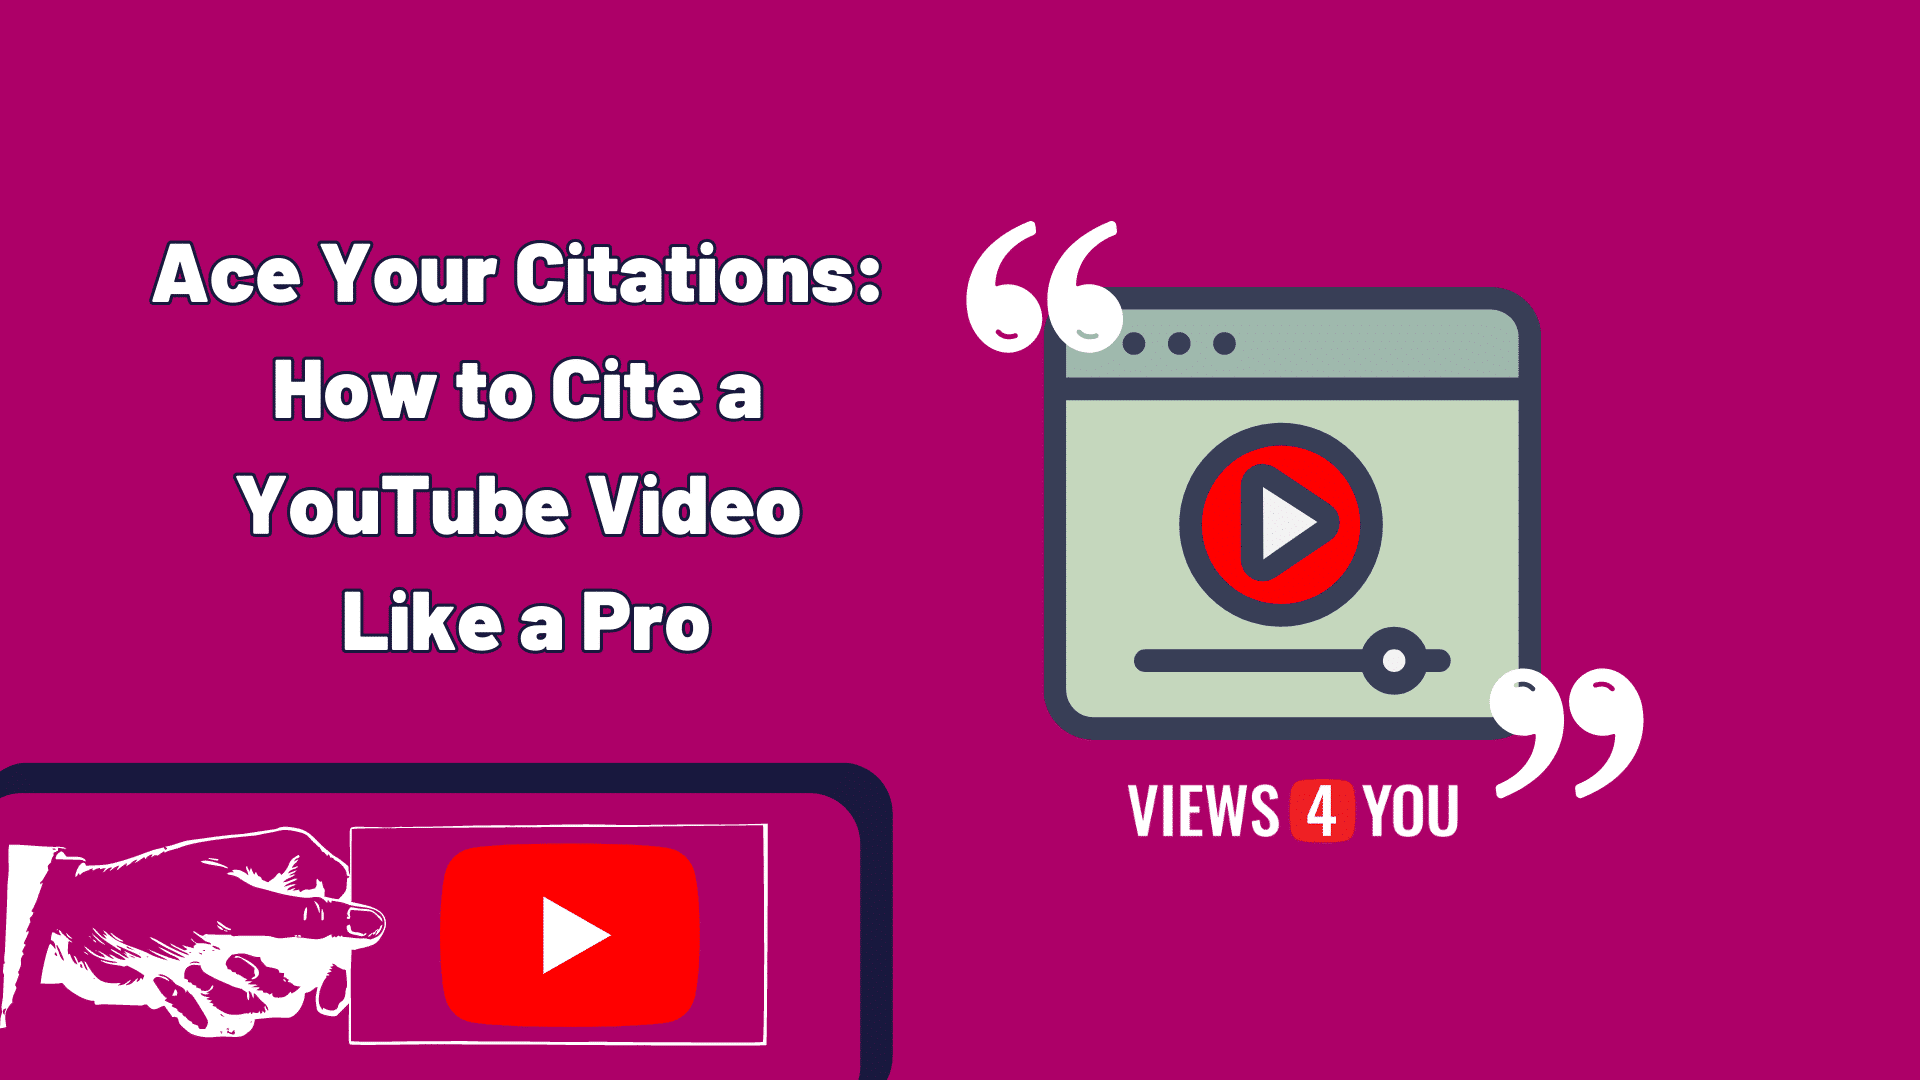 Ace Your Citations: How to Cite a YouTube Video Like a Pro